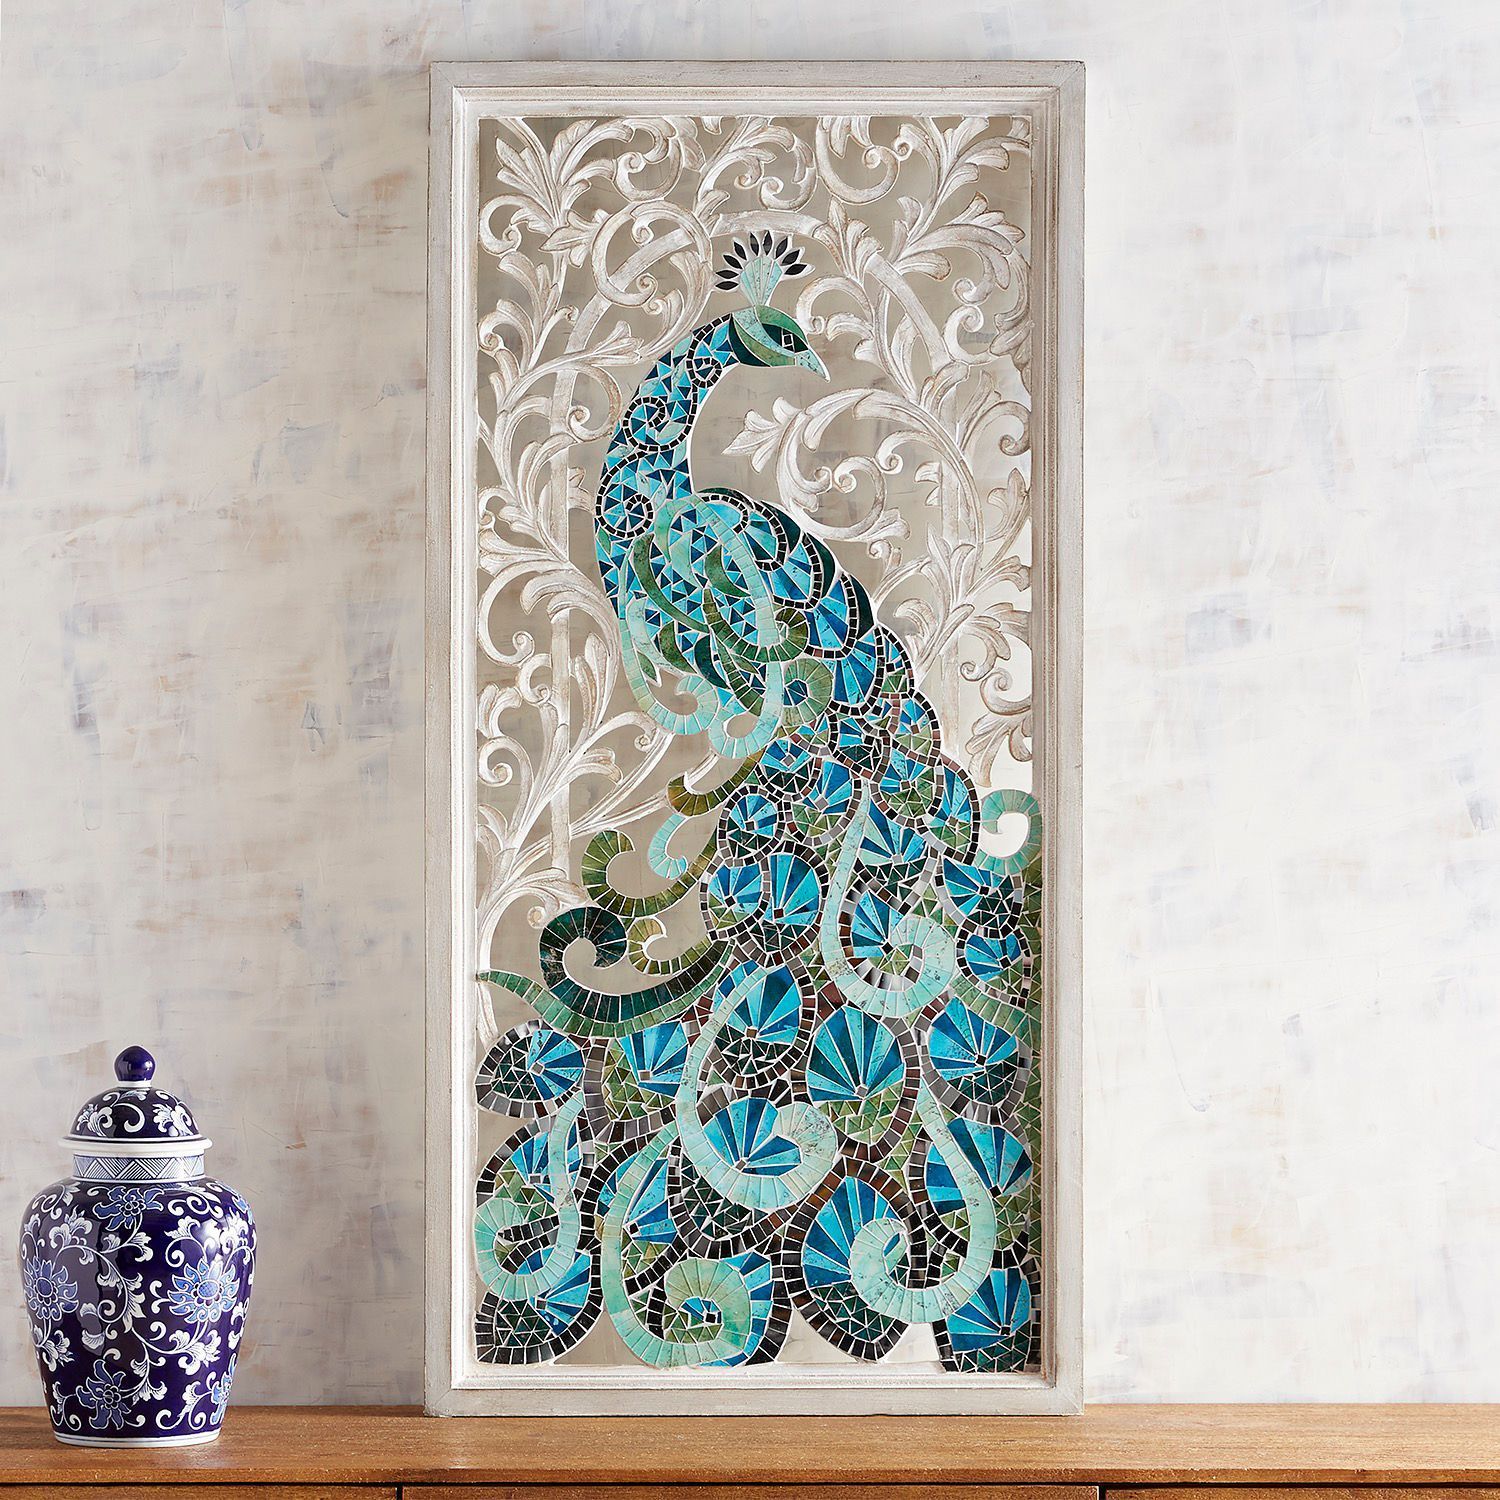 Aqua Peacock Mosaic Wall Panel | Pier 1 Imports | Peacock Wall Art With Regard To Most Popular Pier Wall Art (View 20 of 20)